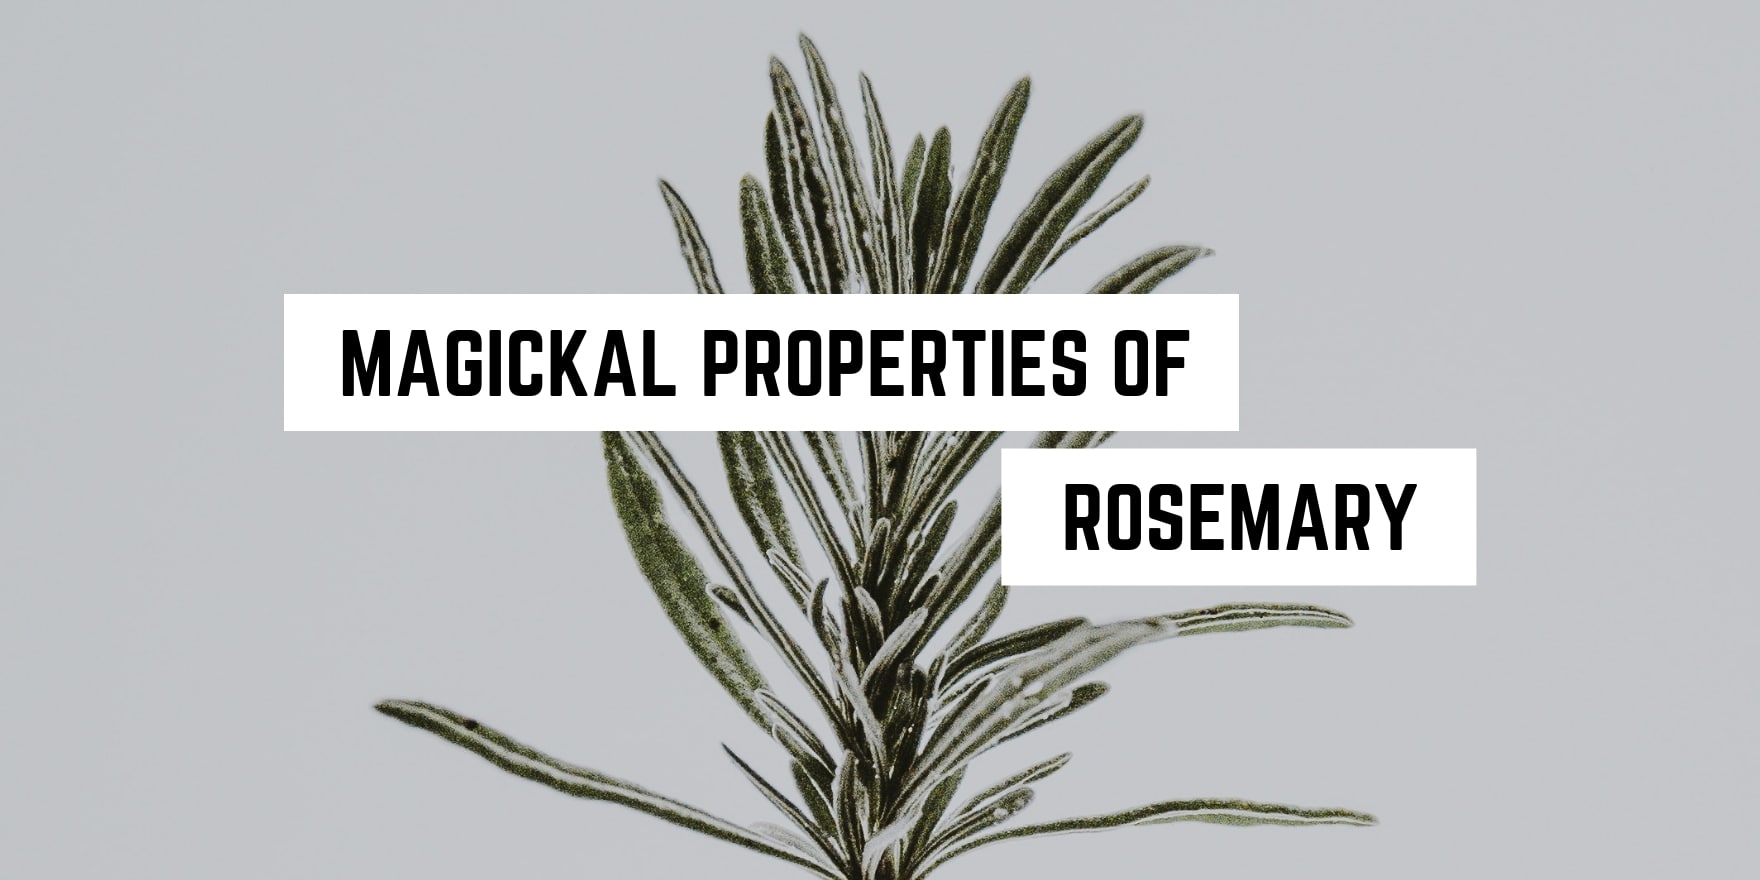 Aromatic enlightenment: unveiling the mystical virtues of rosemary in our new age product.